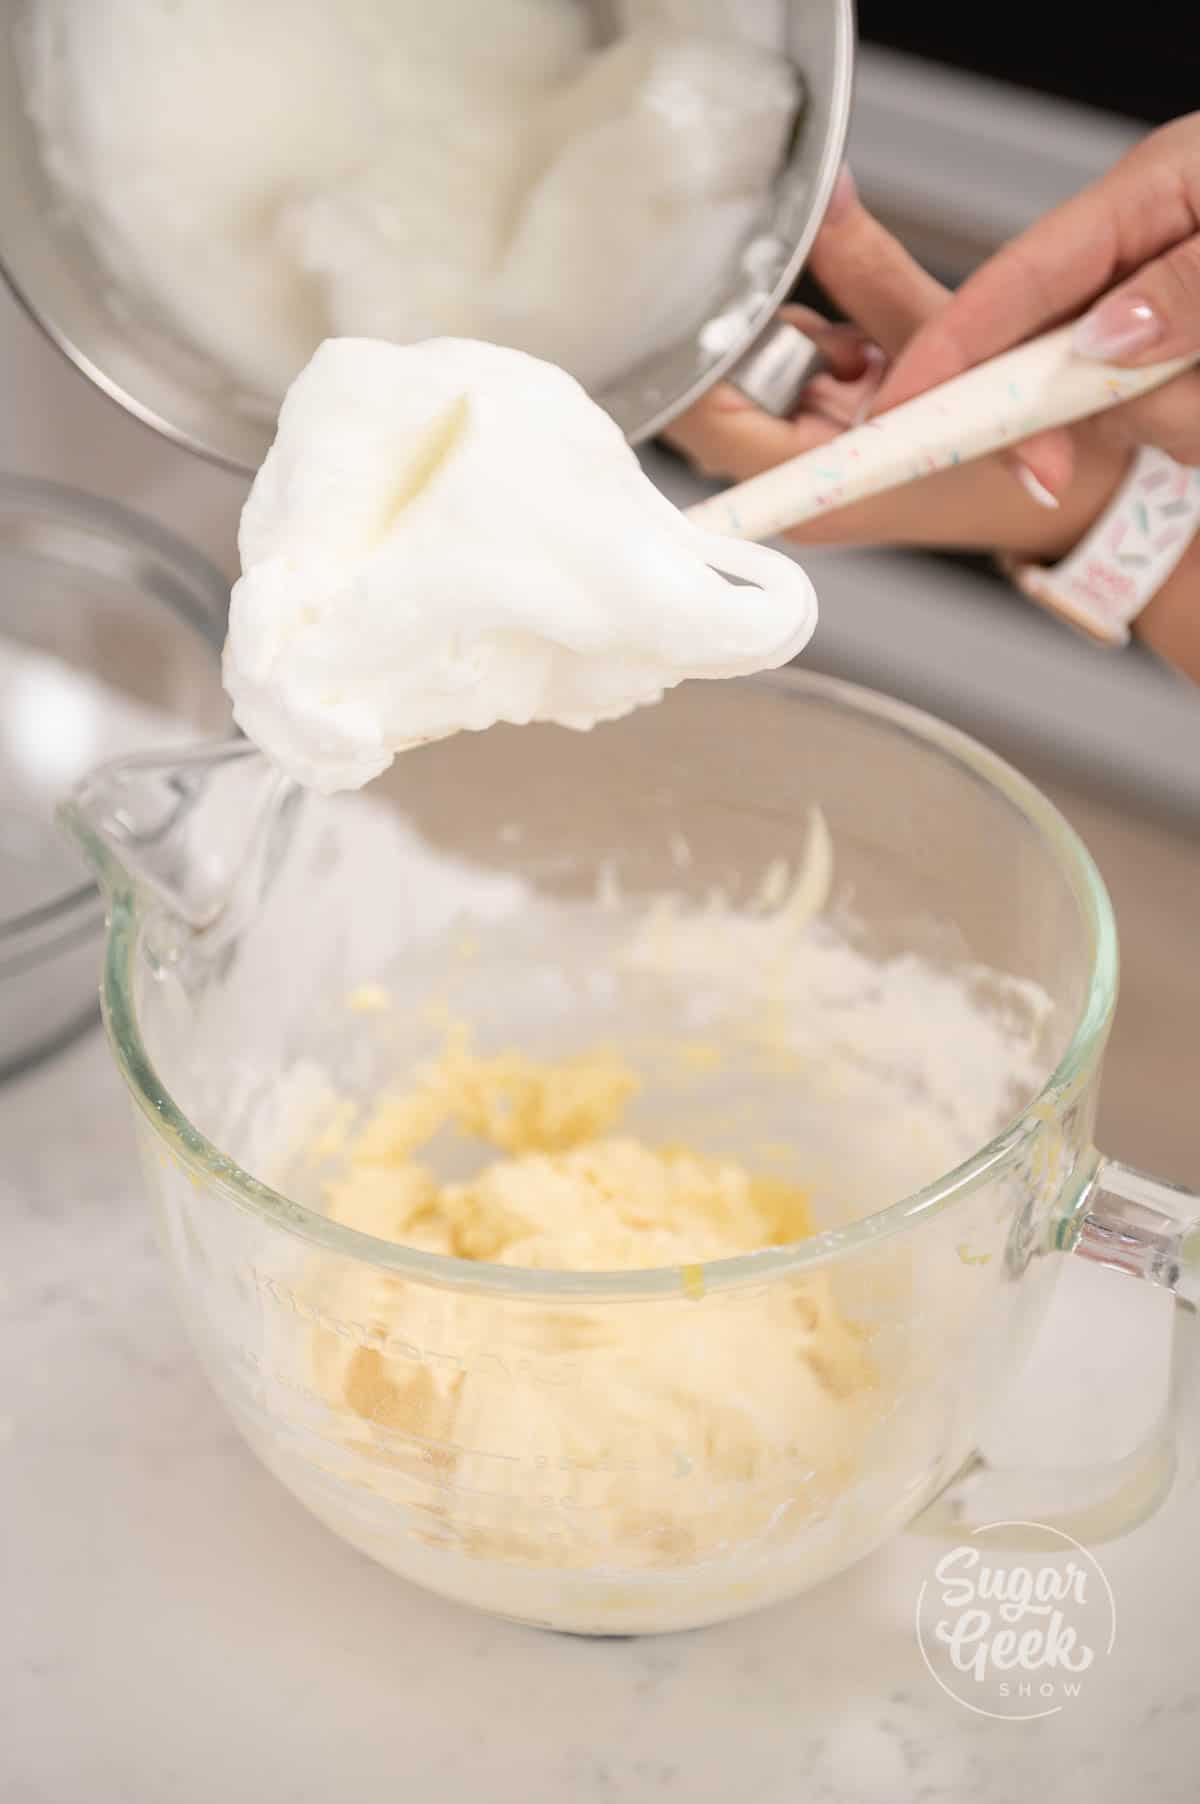 hand holding spatula covered in batter over mixing bowl